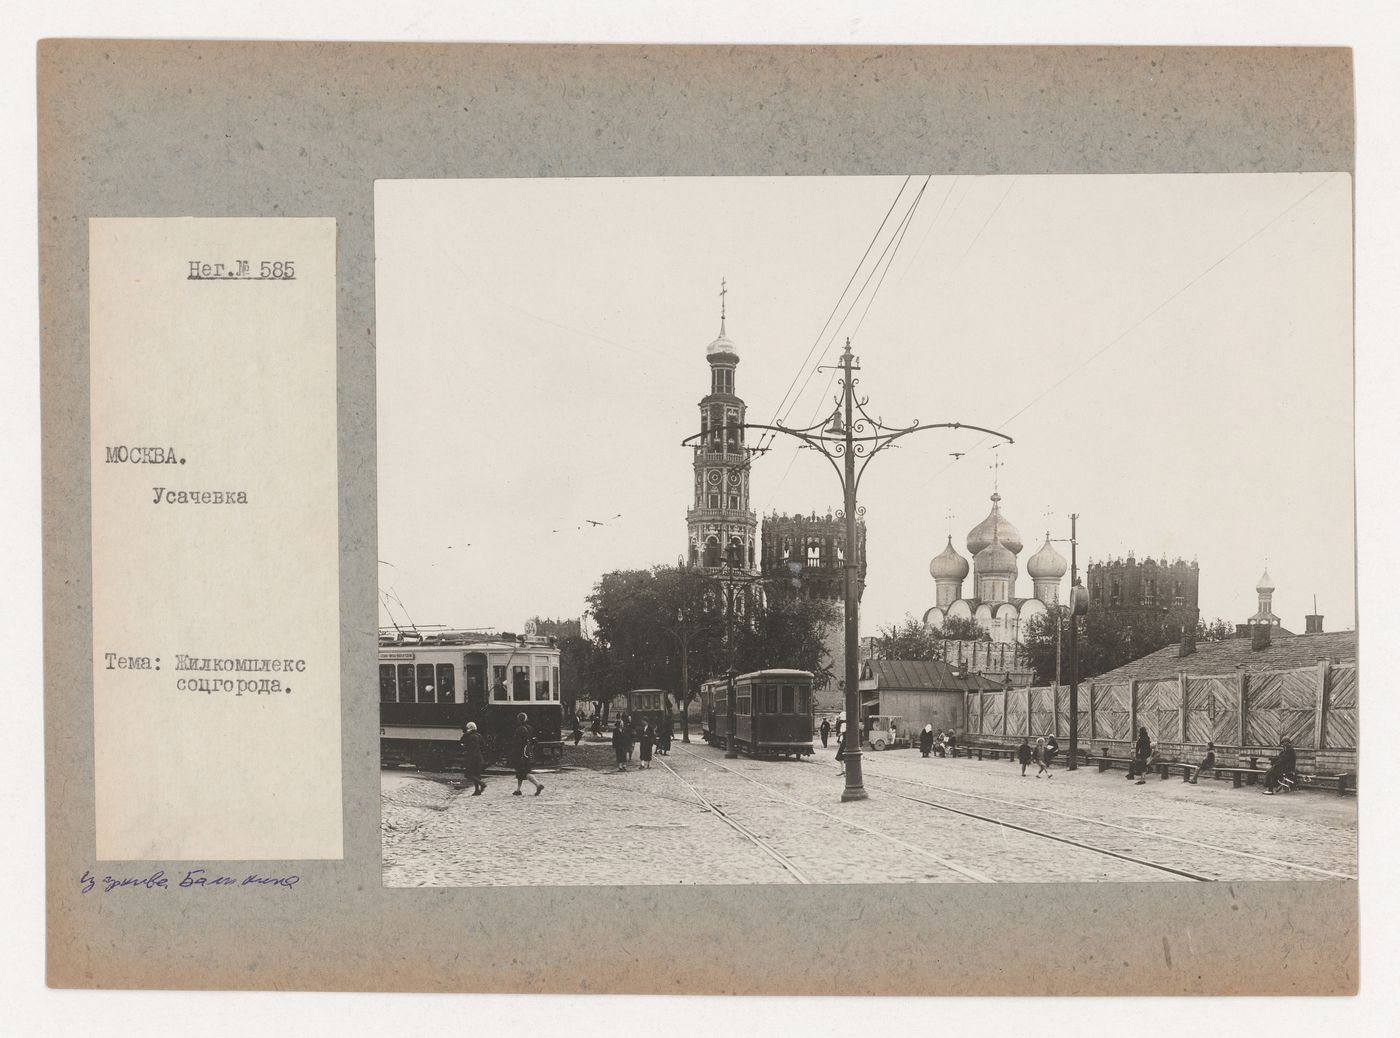 View of a square in the Usachevka complex showing streetcars and the Novodevichii Convent, Moscow